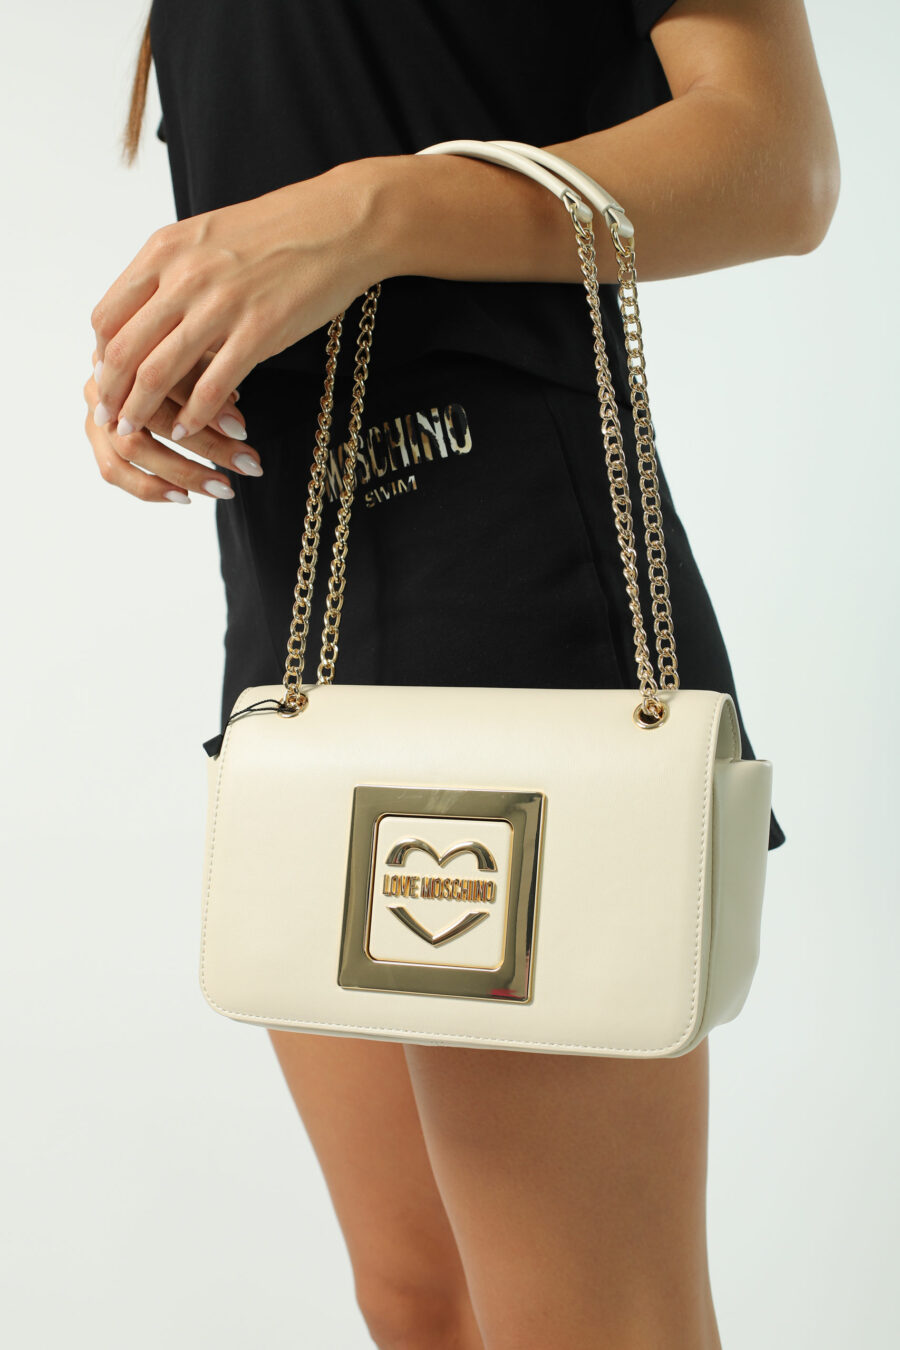 Beige shoulder bag with gold logo and chain - Photos 2386